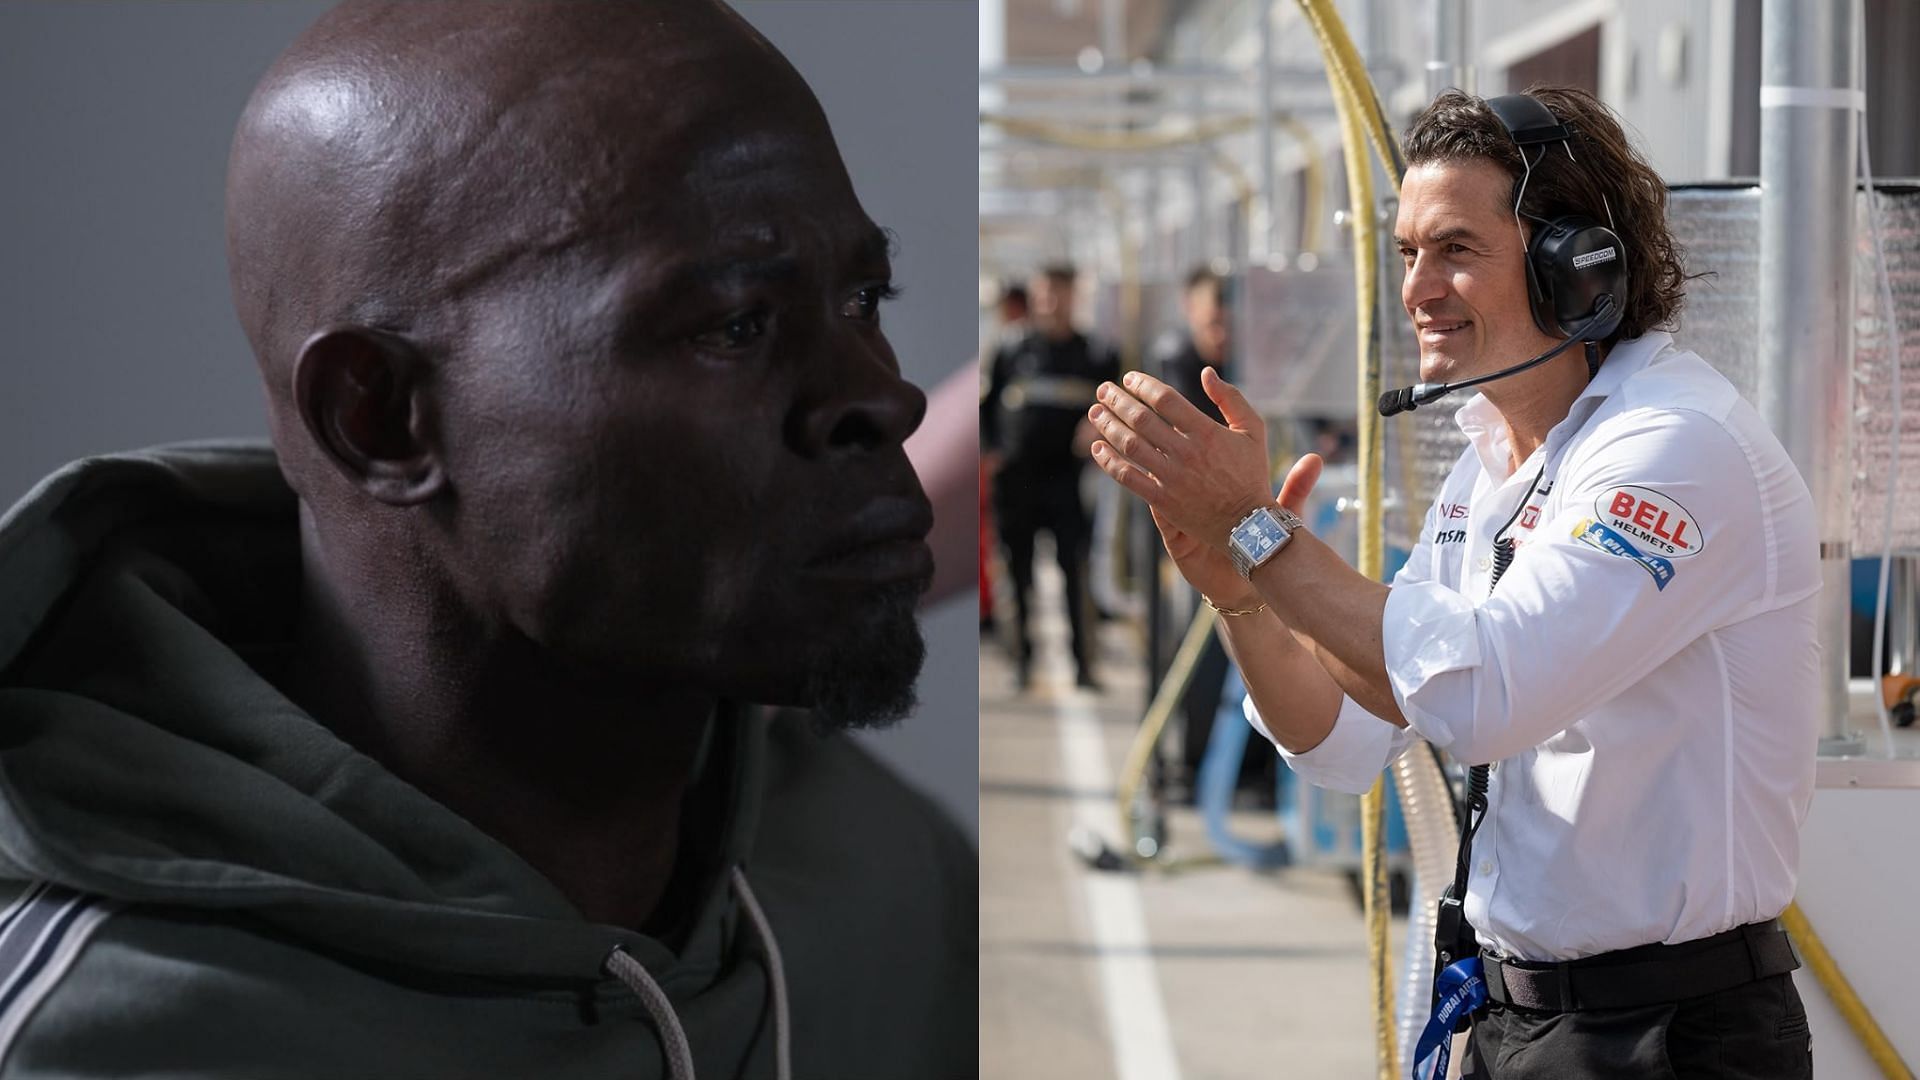 Djimon Hounsou and Orlando Bloom are part of the star cast (Image via Sony and IMDb)